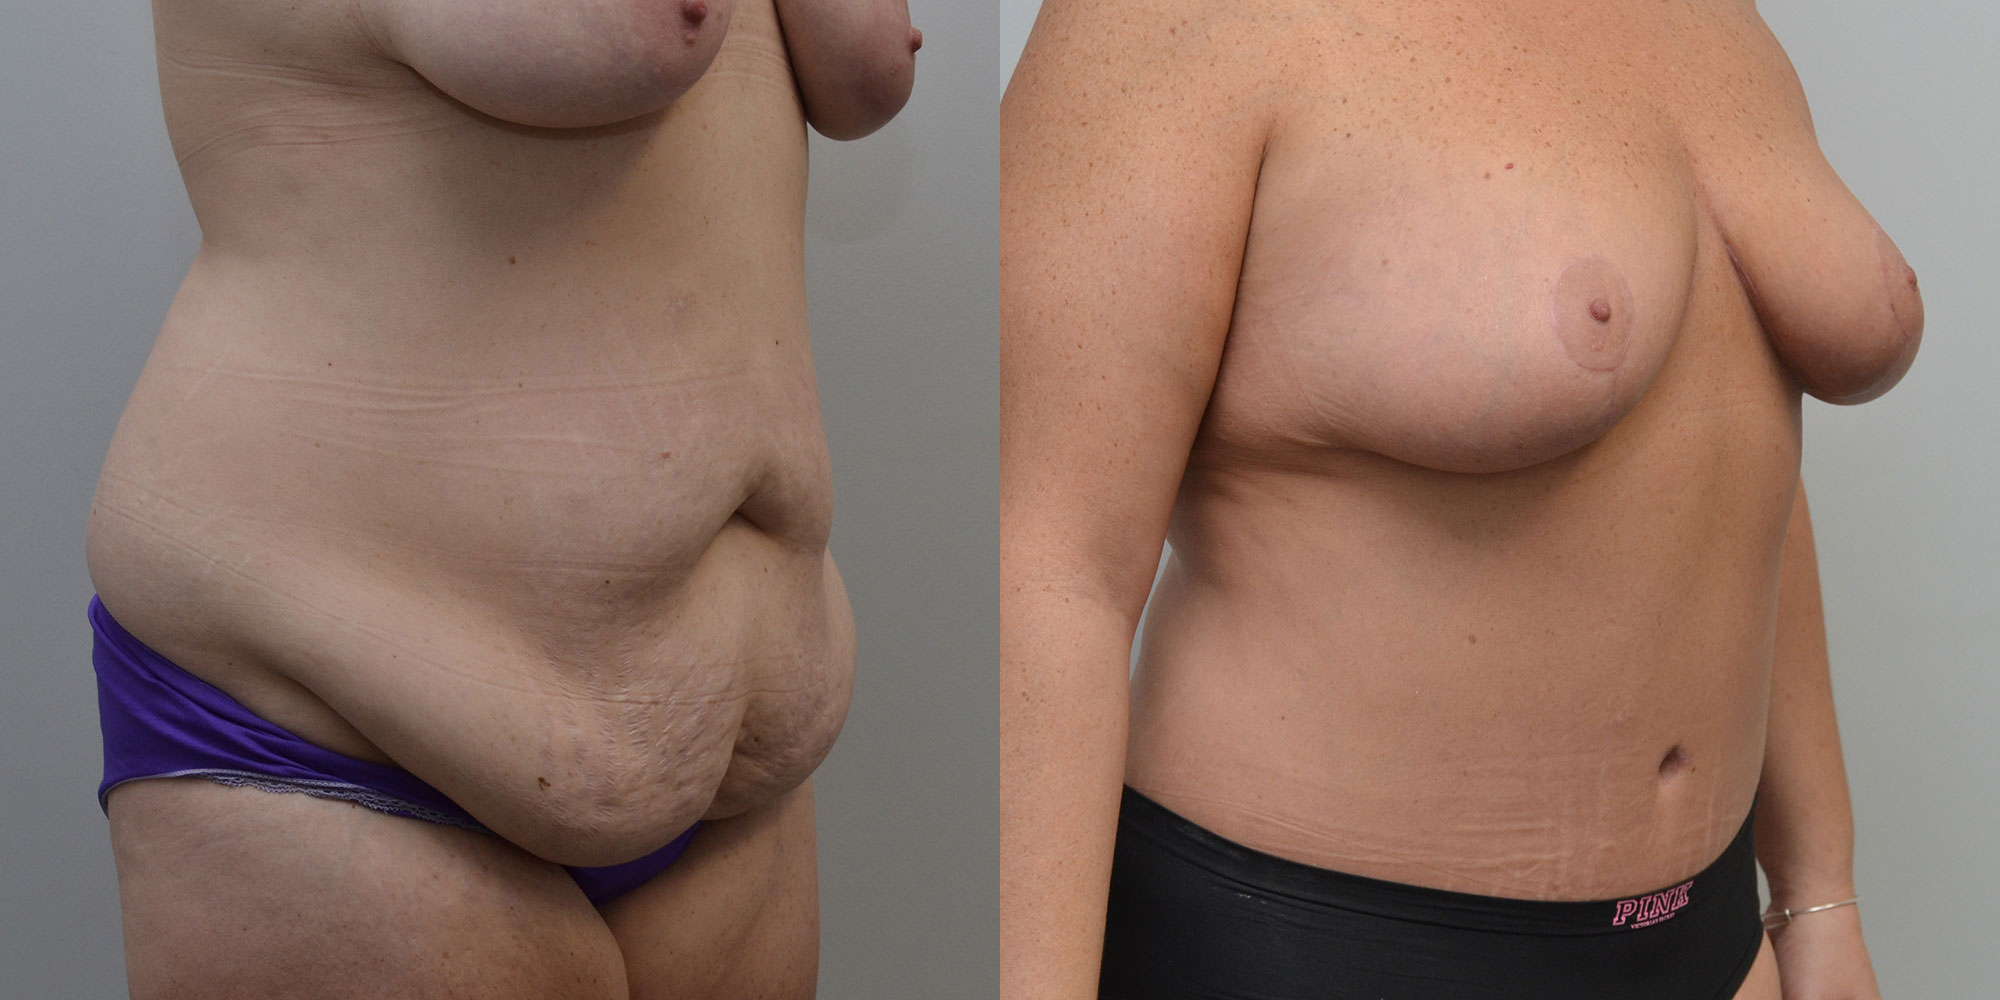 Breast Lift Before and After photo by Susan Gannon, MD of The Plastic Surgery Group in Albany, NY